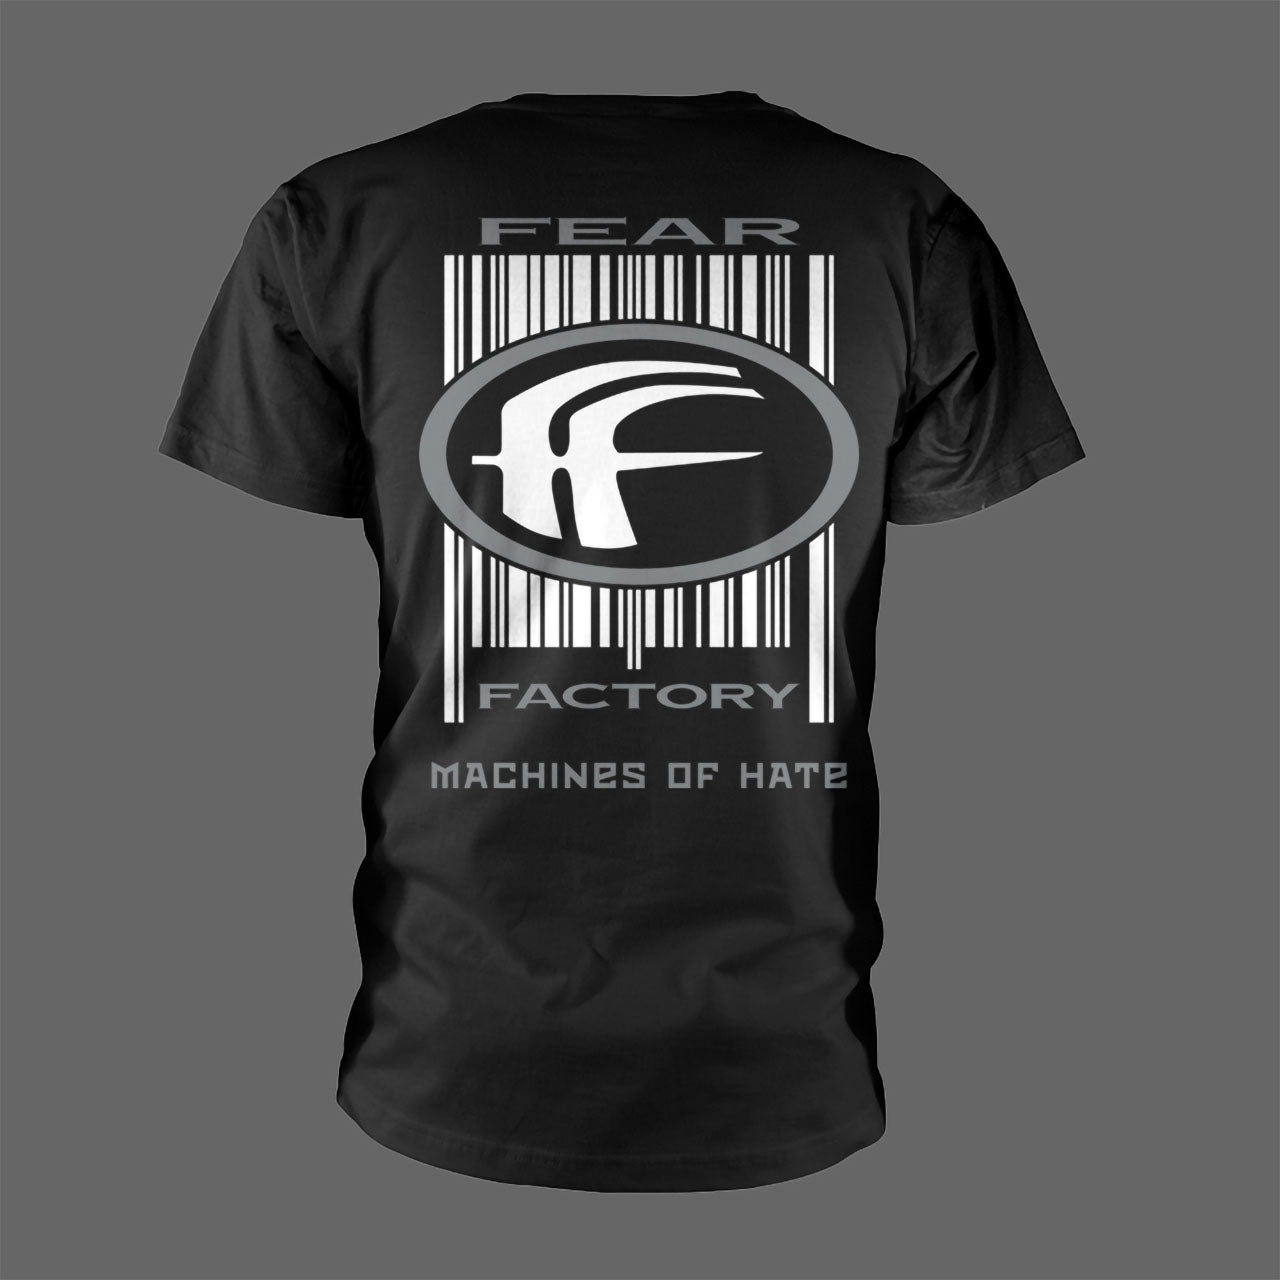 Fear Factory - Machines of Hate (T-Shirt)